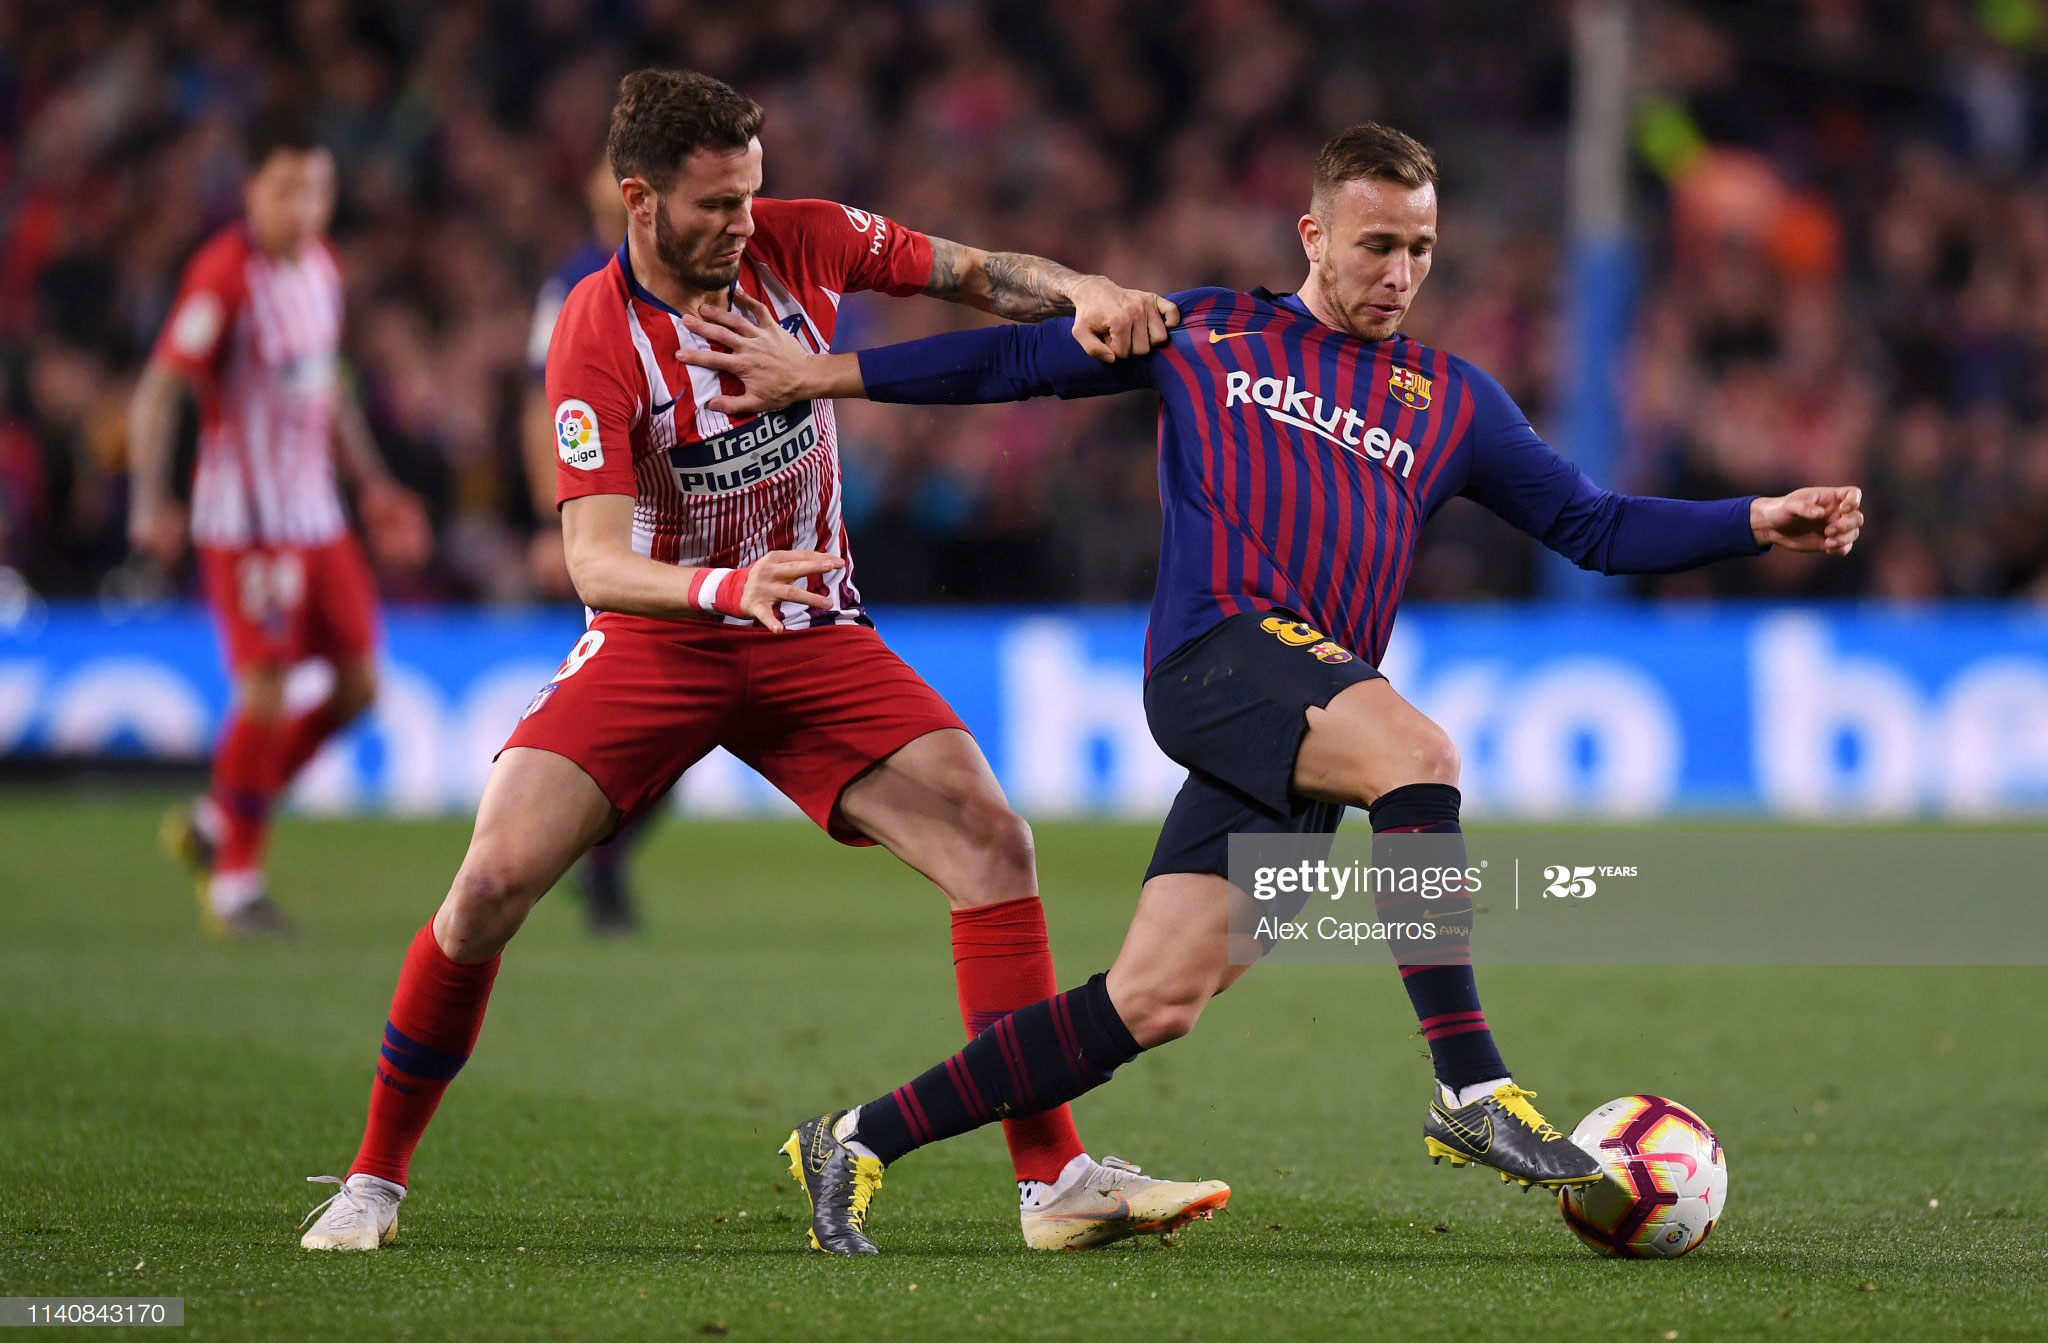 Arthur of Barcelona holds off Saul Niguez of Atletico Madrid during the La Liga match between FC Barcelona and Club Atletico de Madrid at Camp Nou on April 06, 2019 in Barcelona, Spain. (Photo by Alex Caparros/Getty Images)